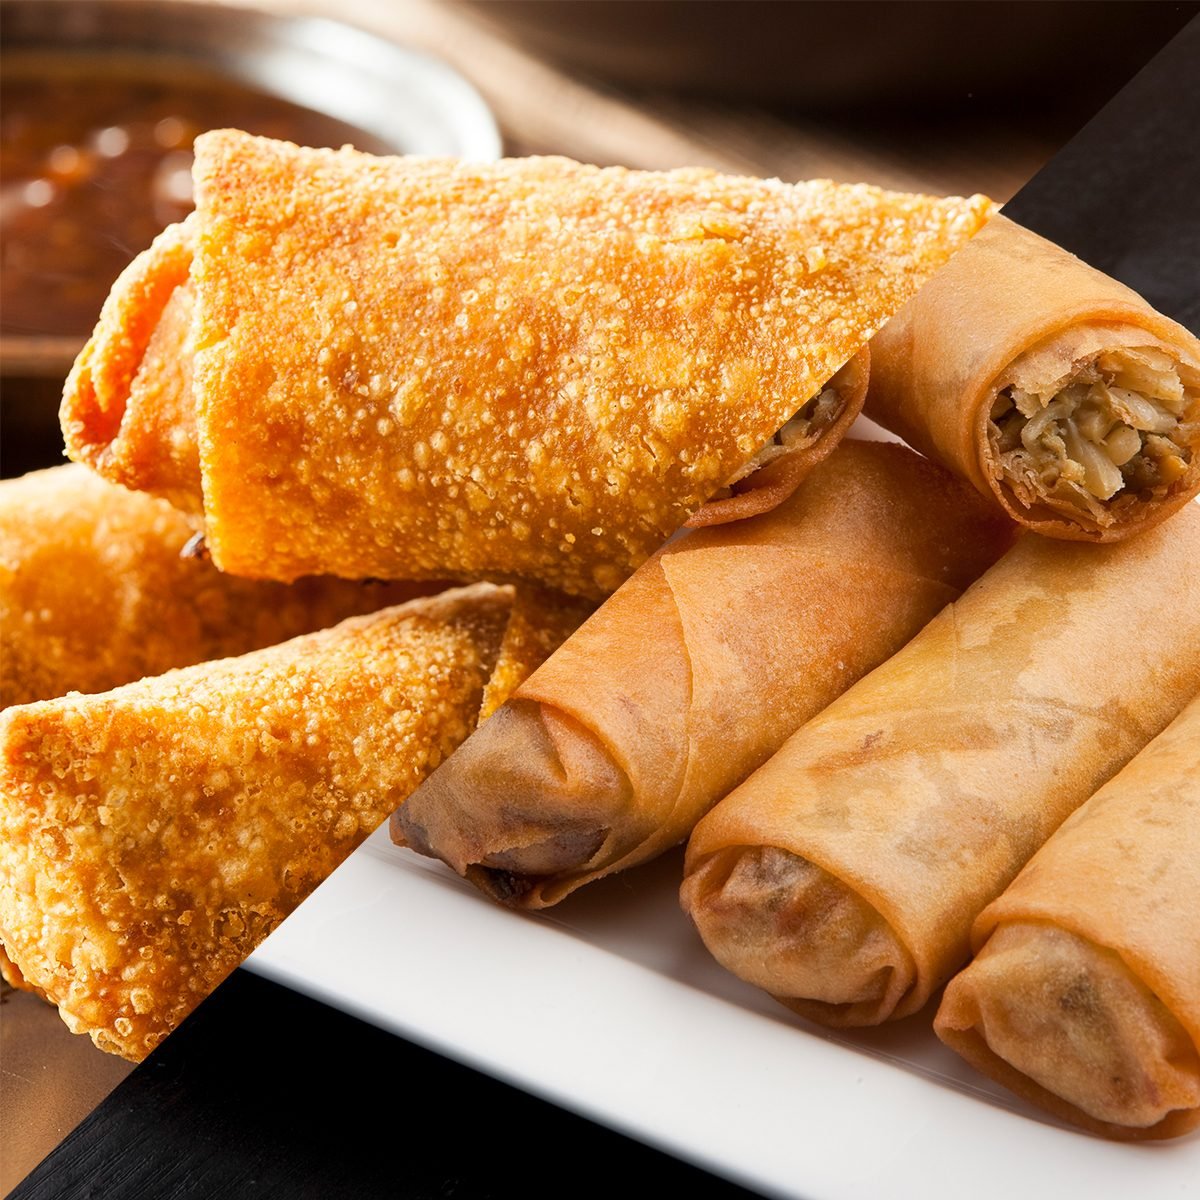 Spring Roll vs. Egg Roll: What's the Difference?